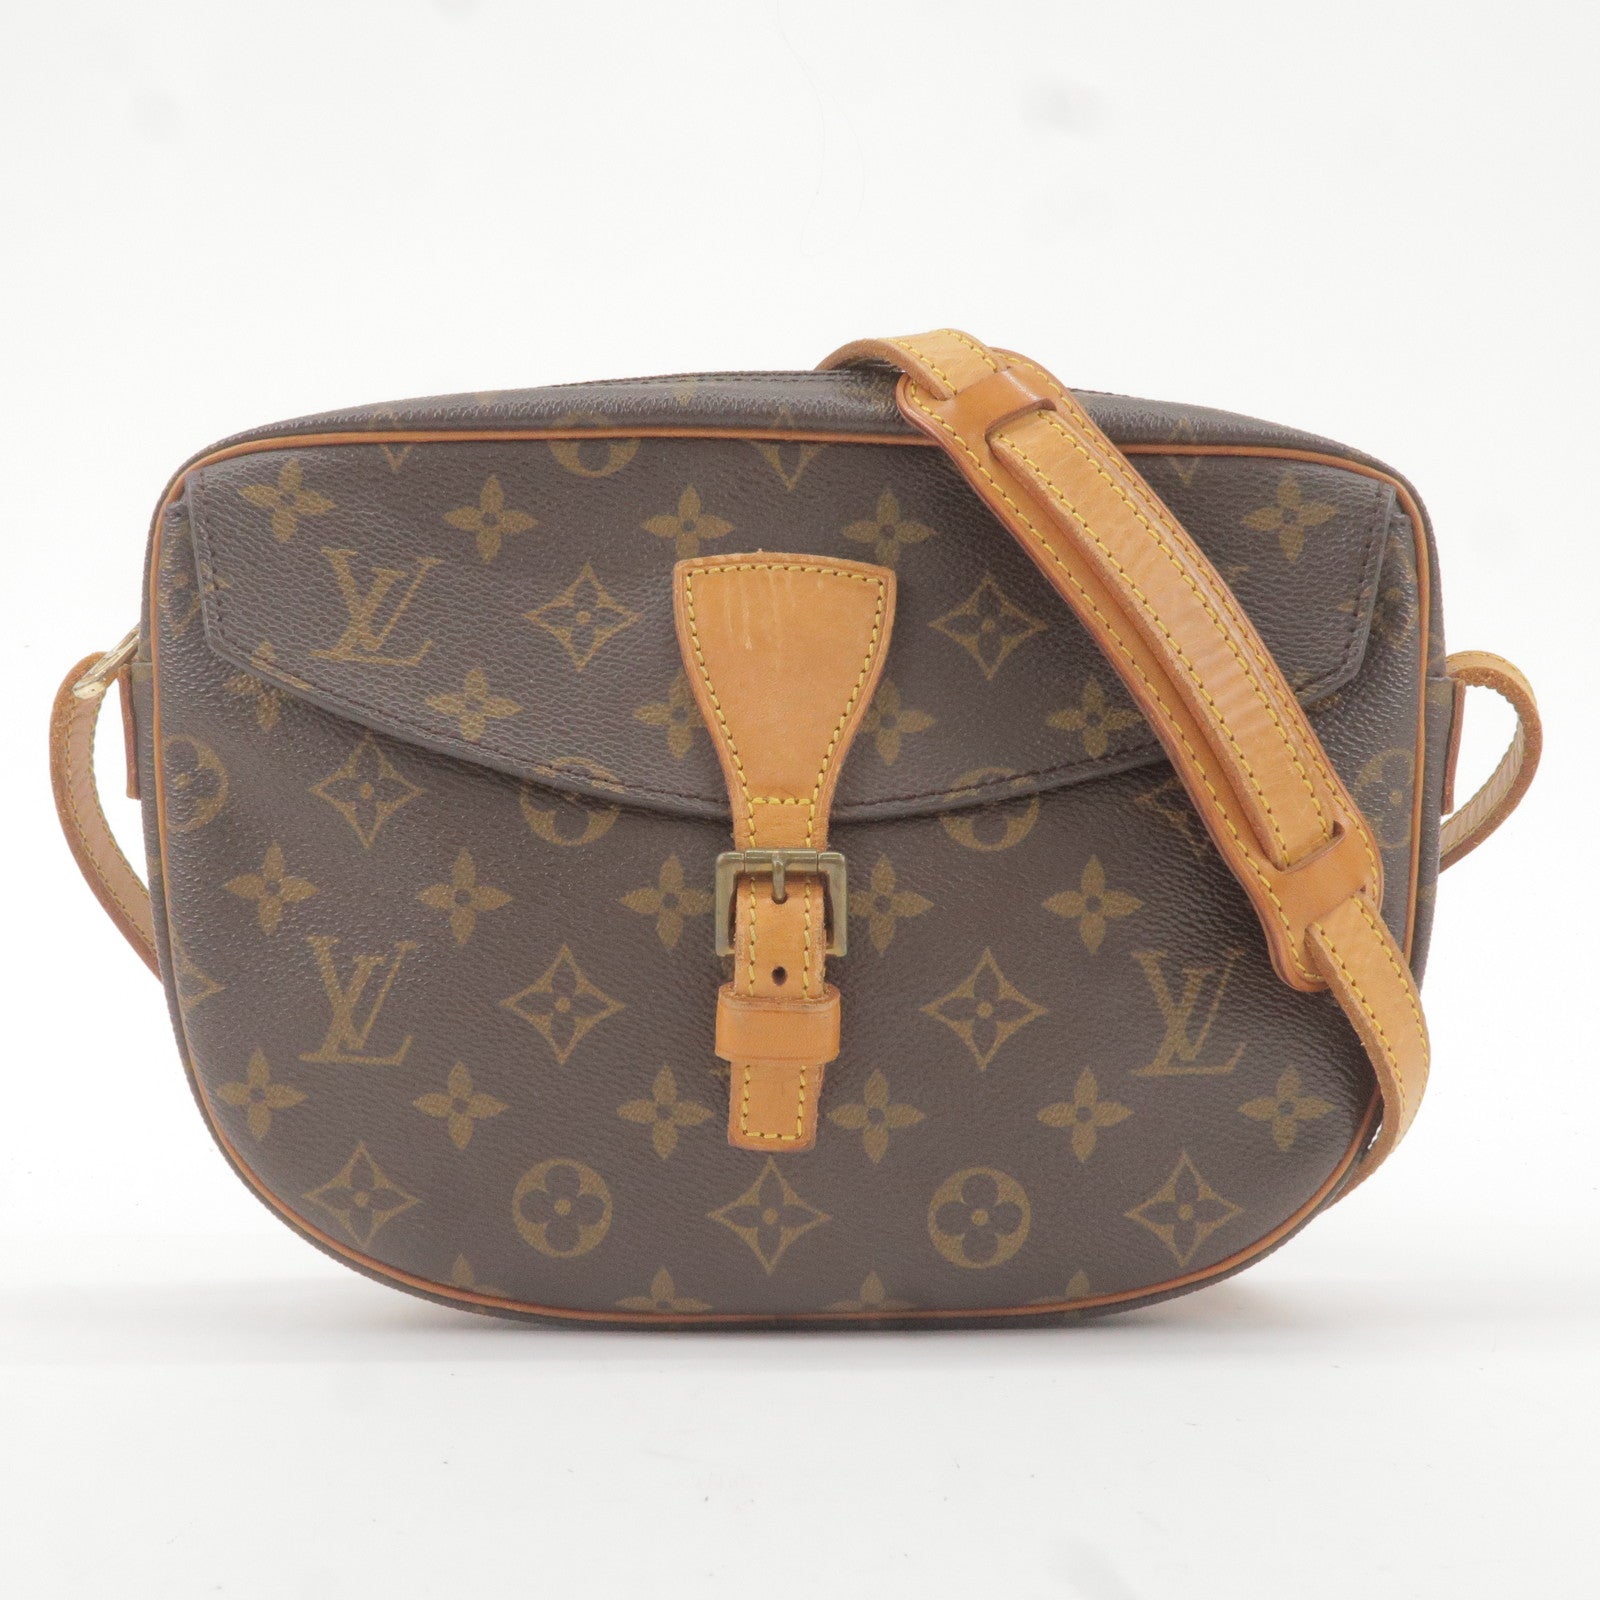 Louis Vuitton America's Cup Backpack in Orange Monogram Canvas and